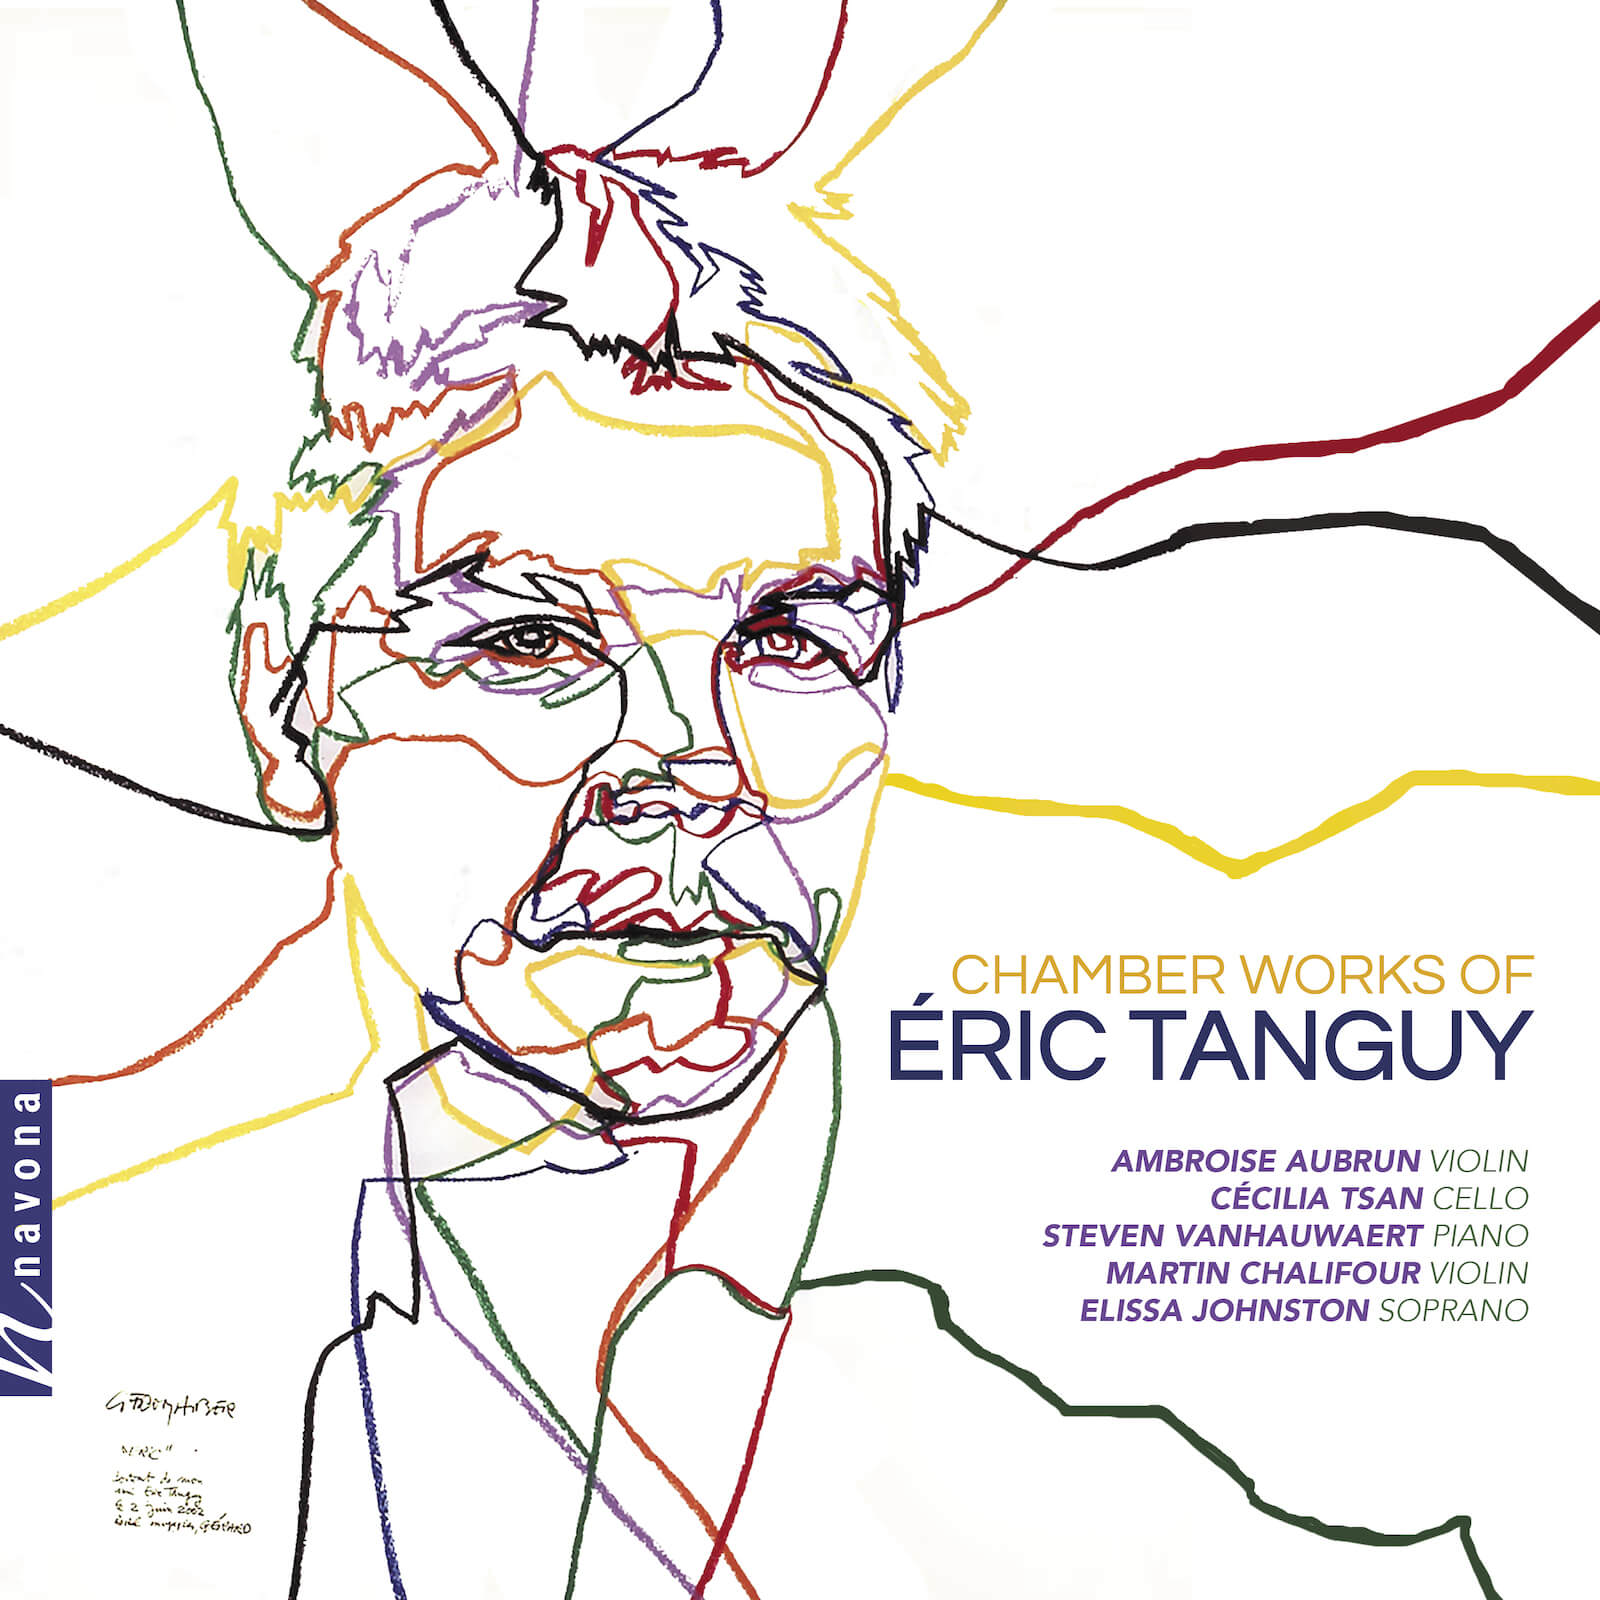 CHAMBER WORKS OF ÉRIC TANGUY